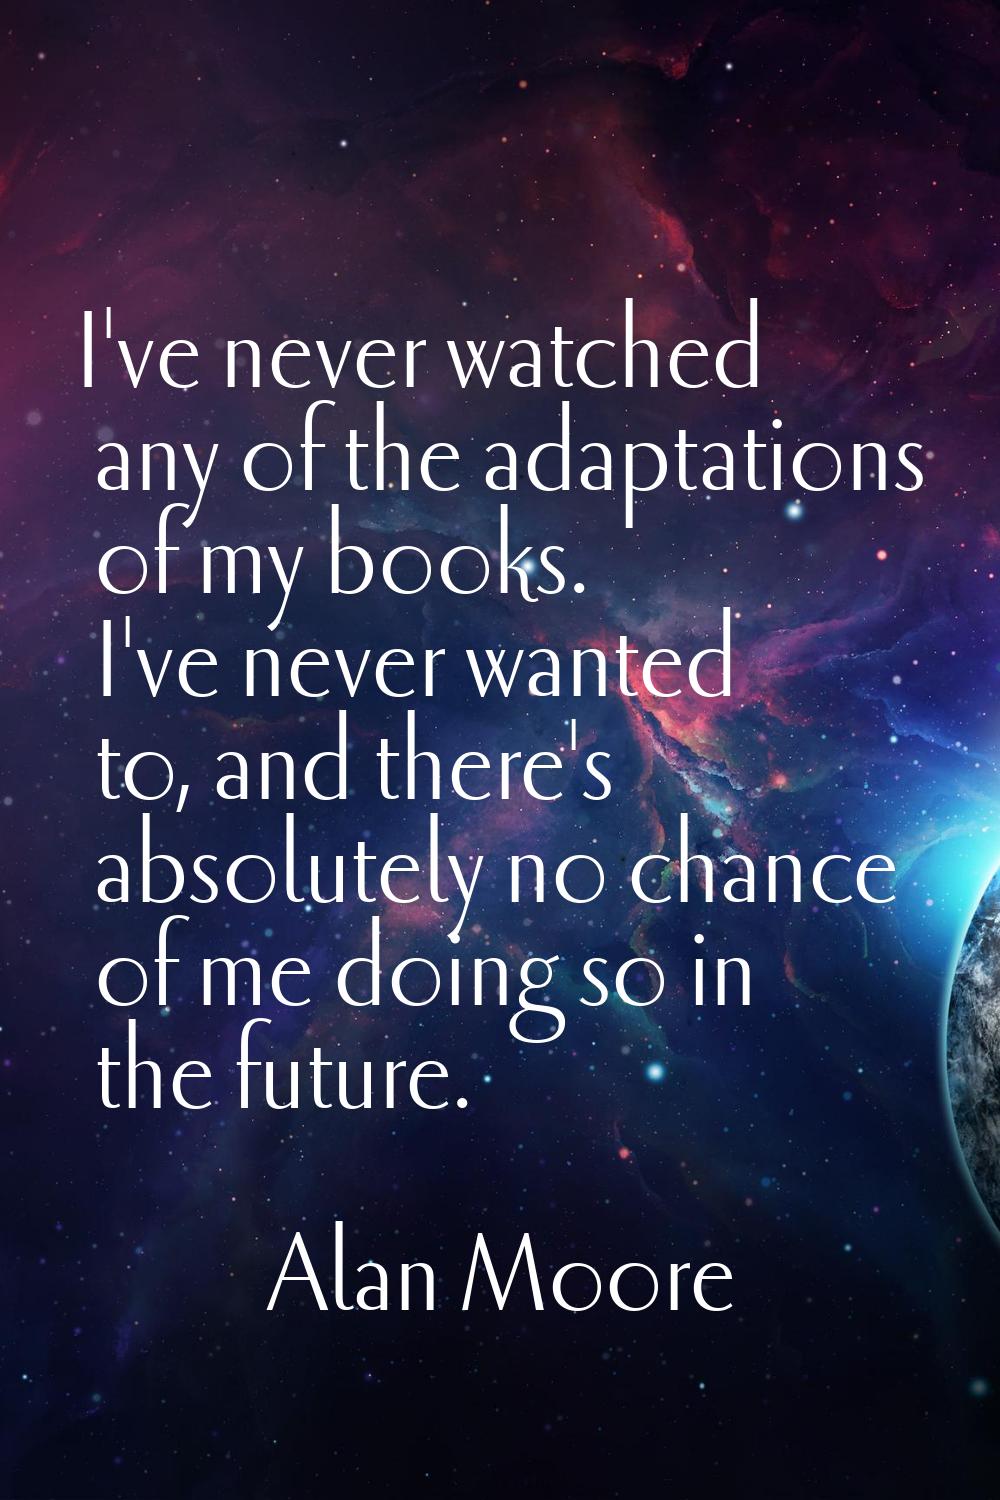 I've never watched any of the adaptations of my books. I've never wanted to, and there's absolutely